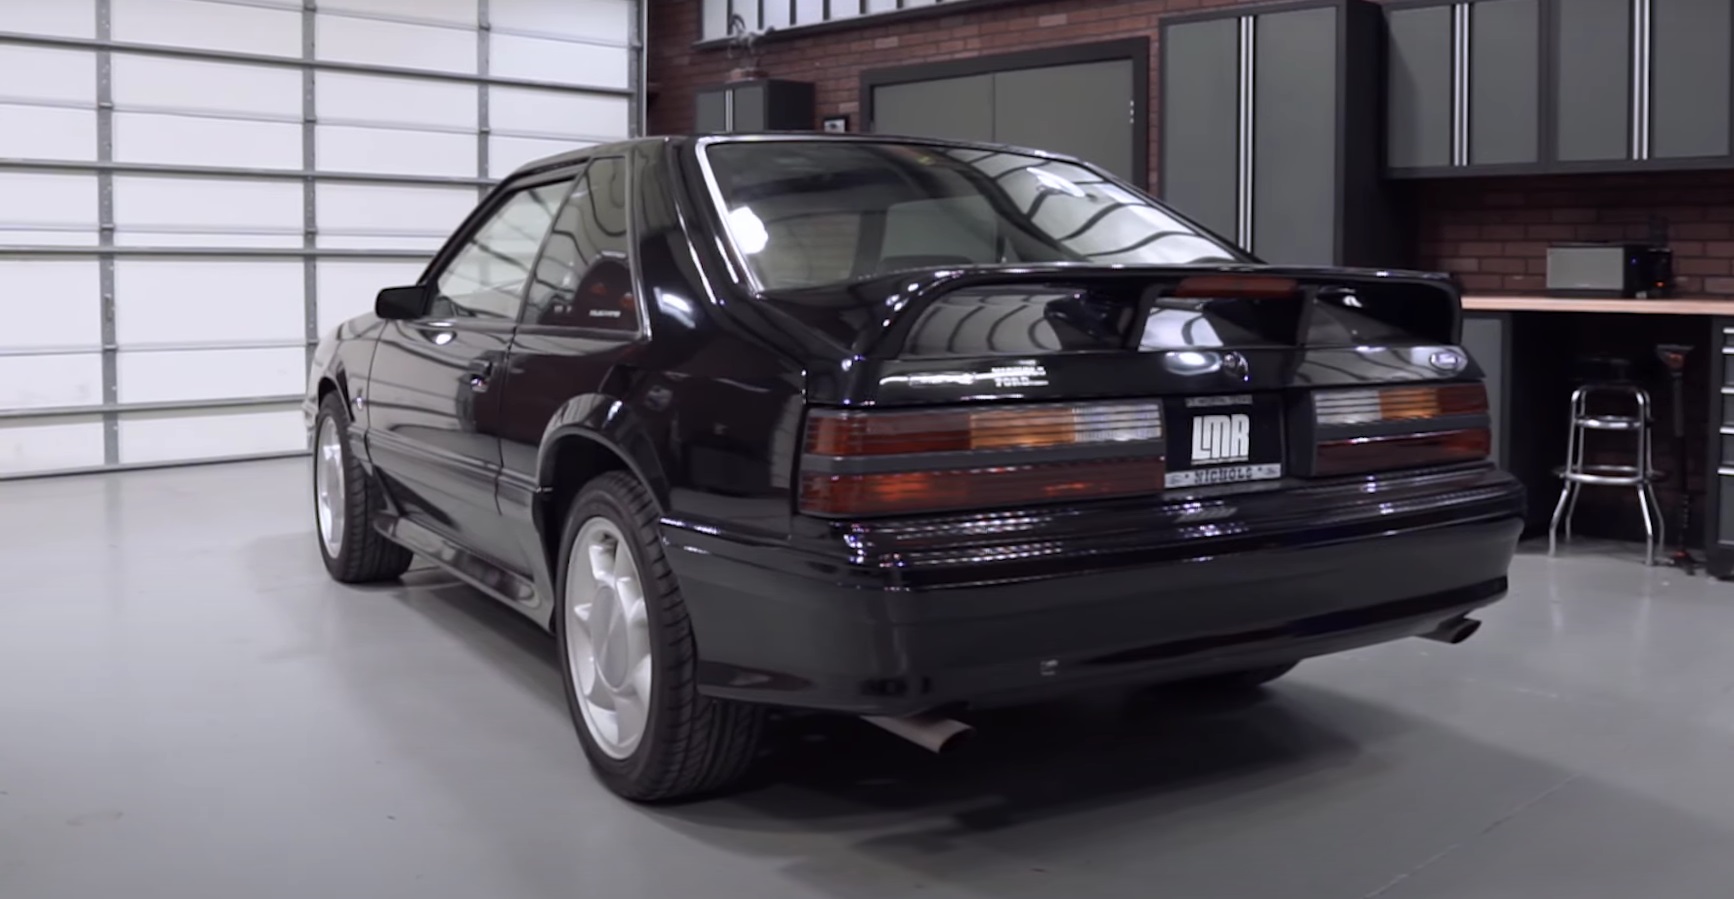 Video: What Is A 1993 Ford Mustang Cobra?